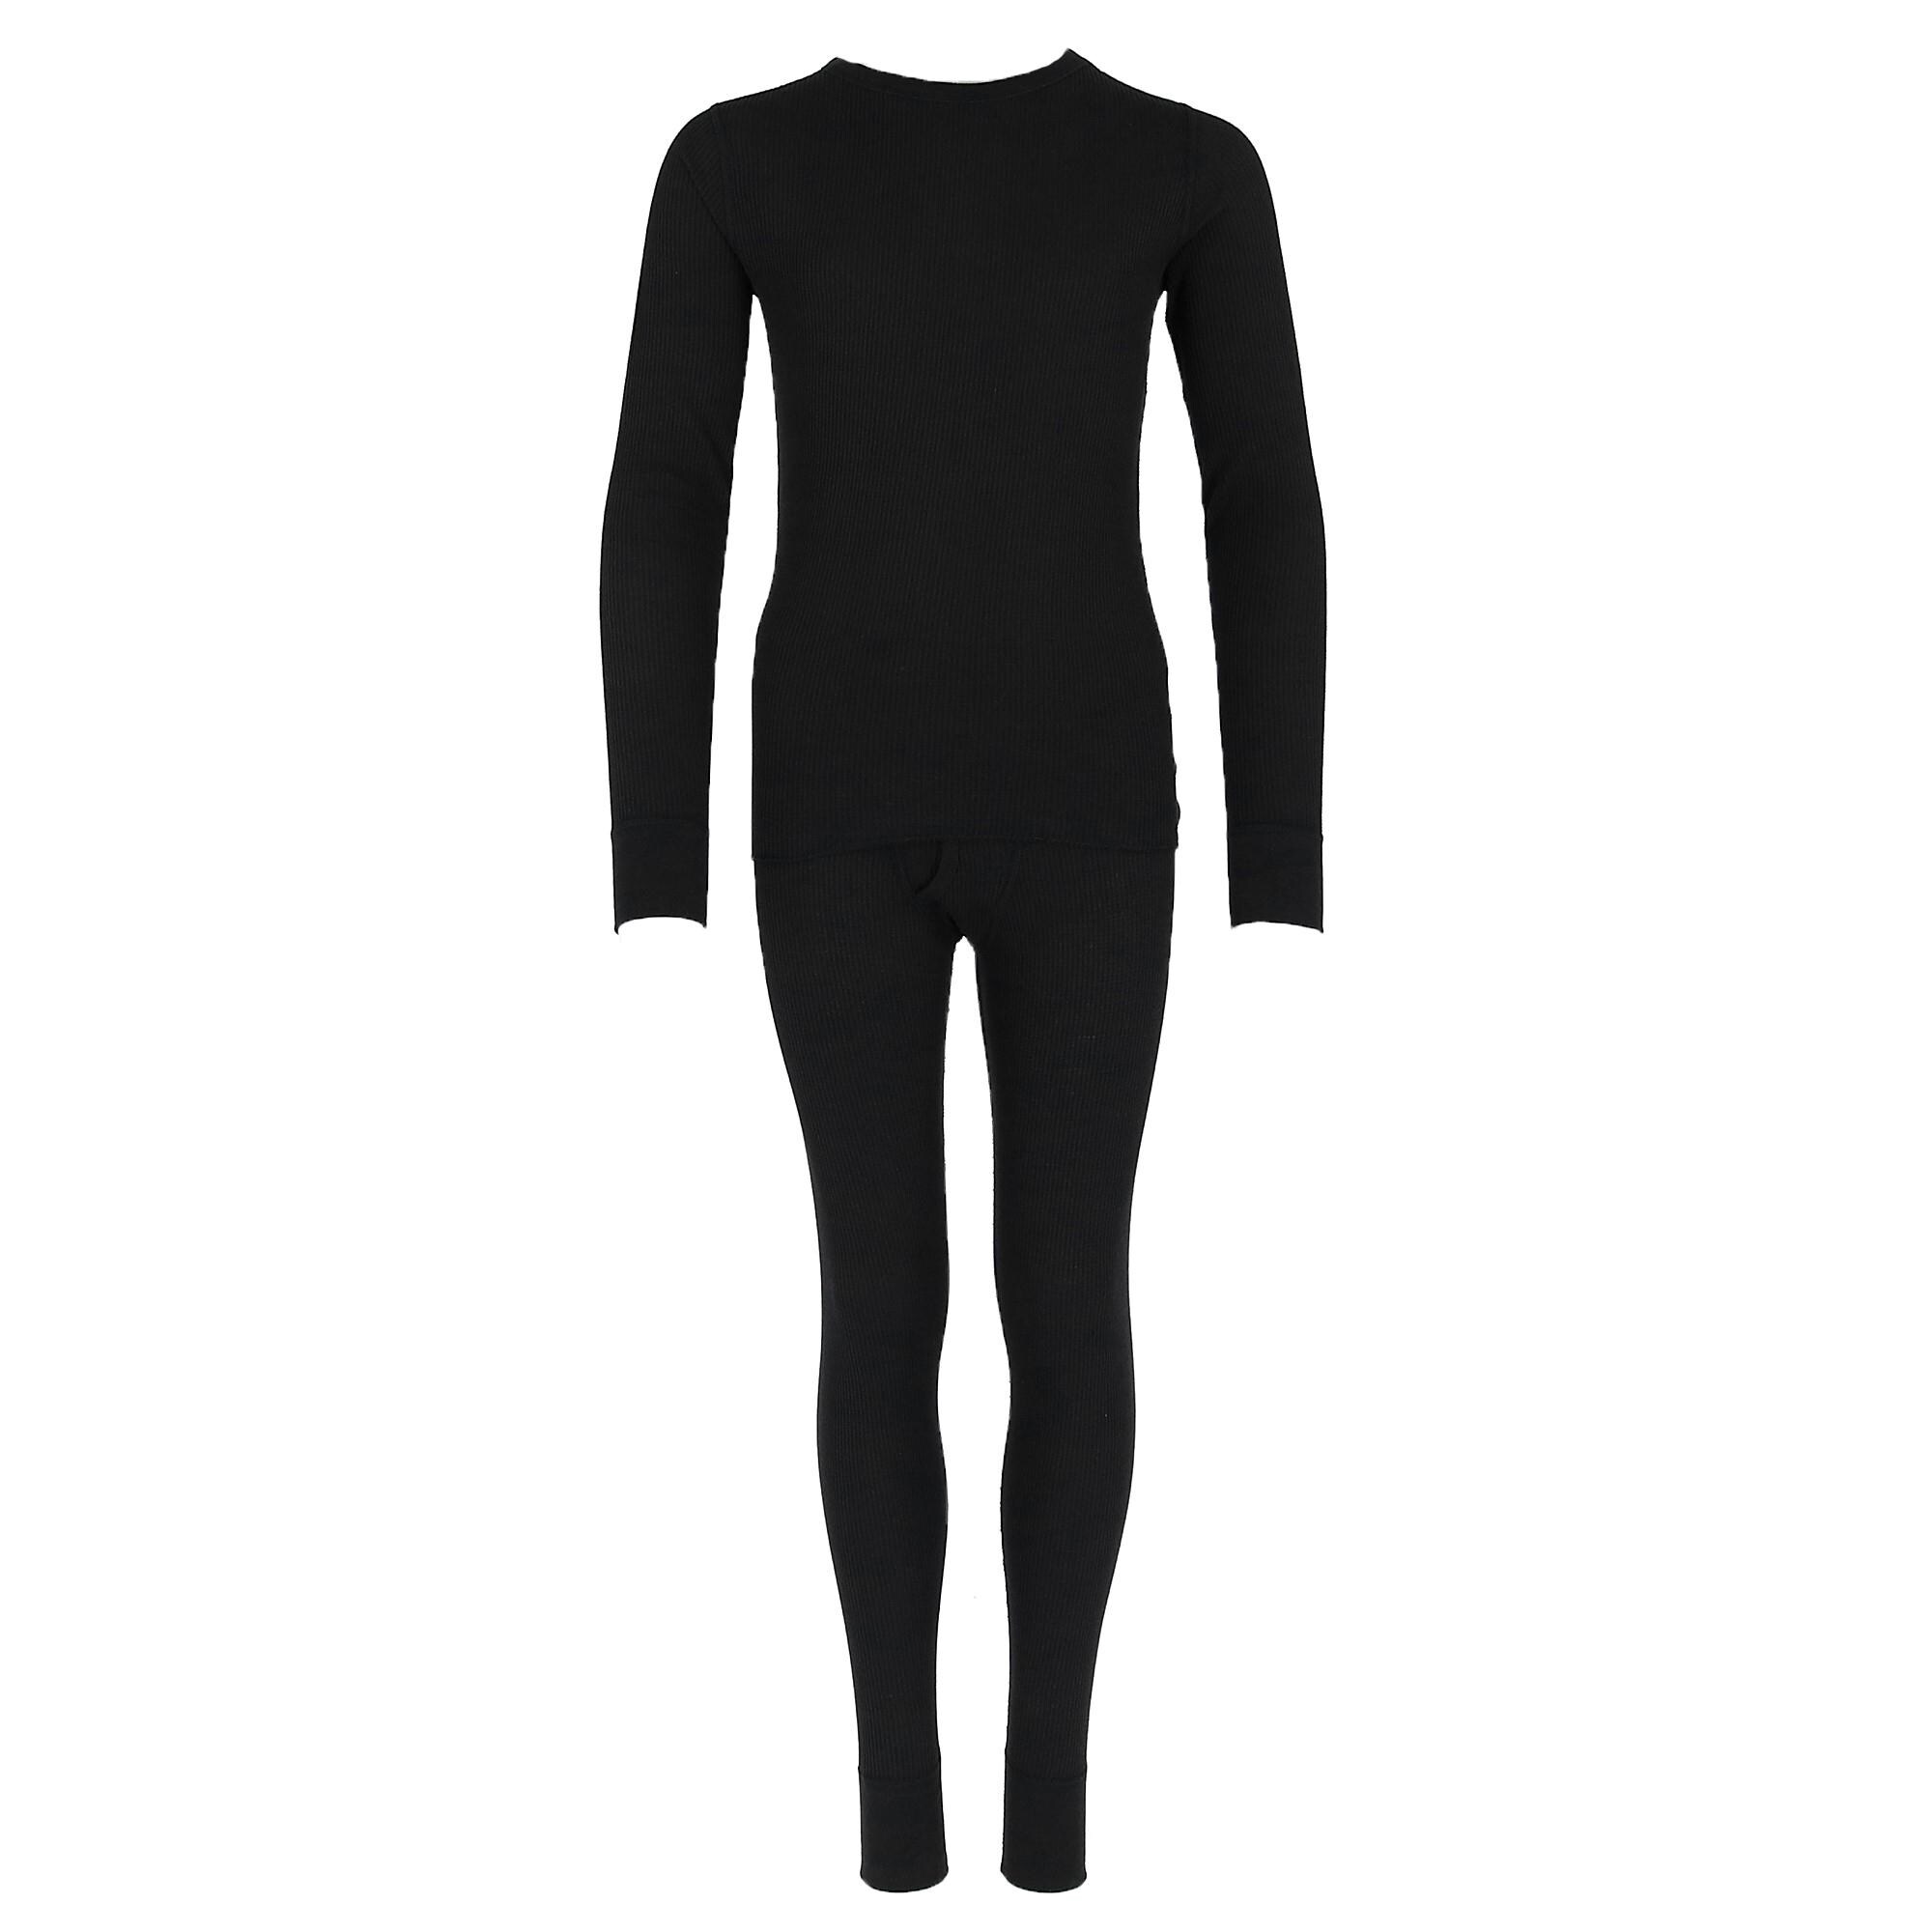 thinsulate thermal underwear - 65% OFF 